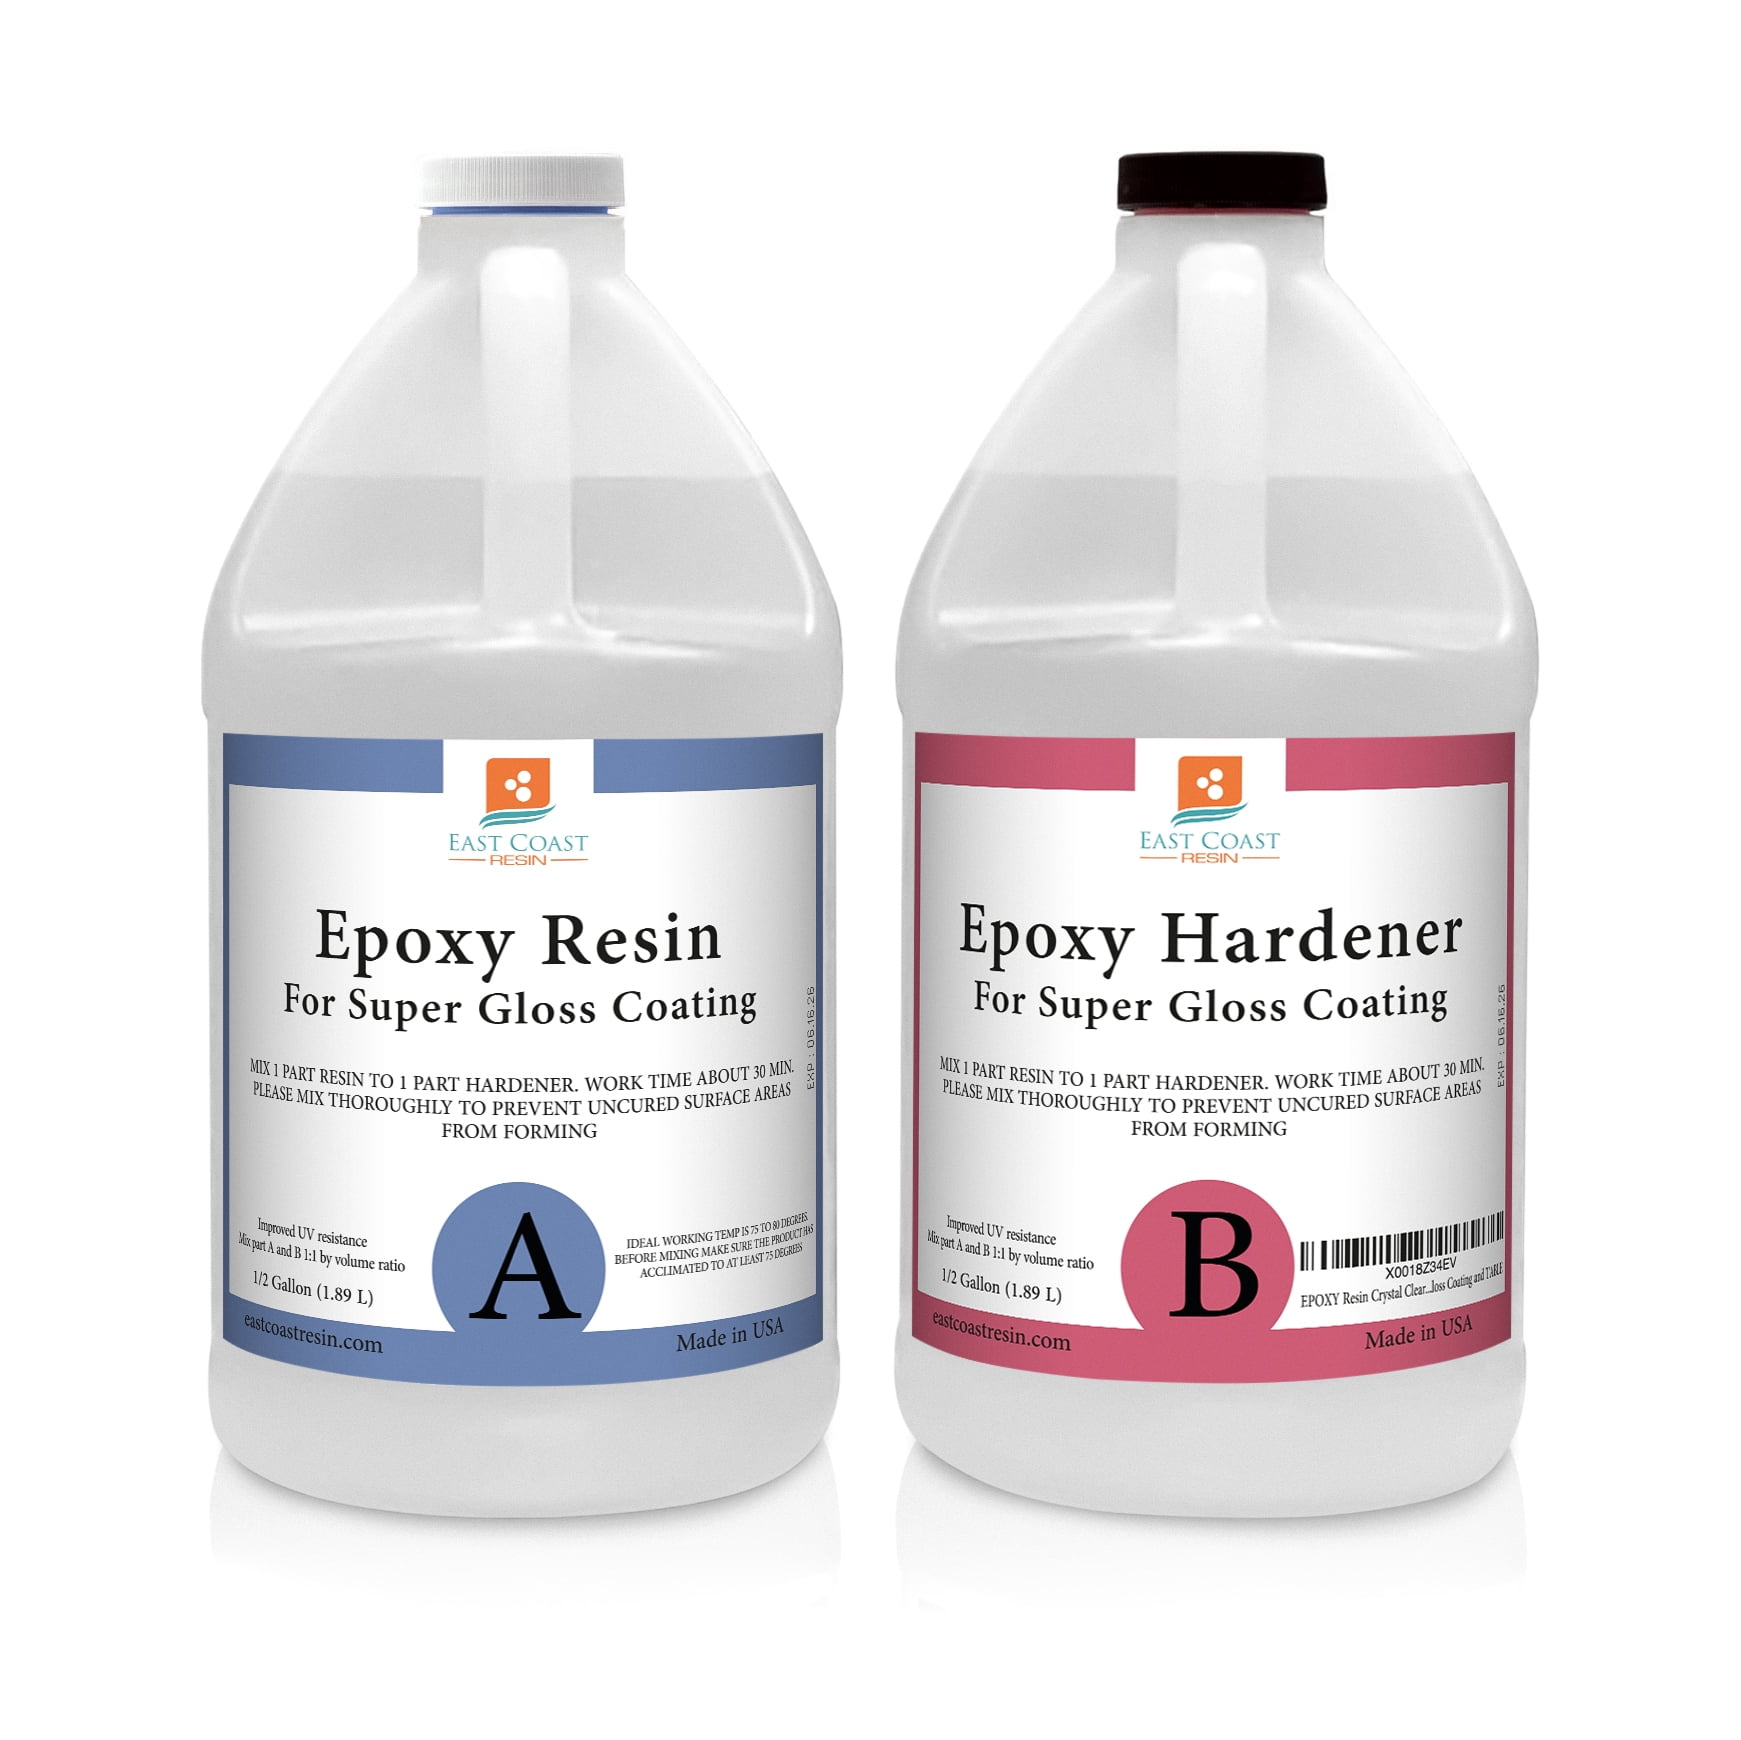 East Coast Resin Epoxy 1 gal Kit for Super Coating and Table Tops - Walmart.com